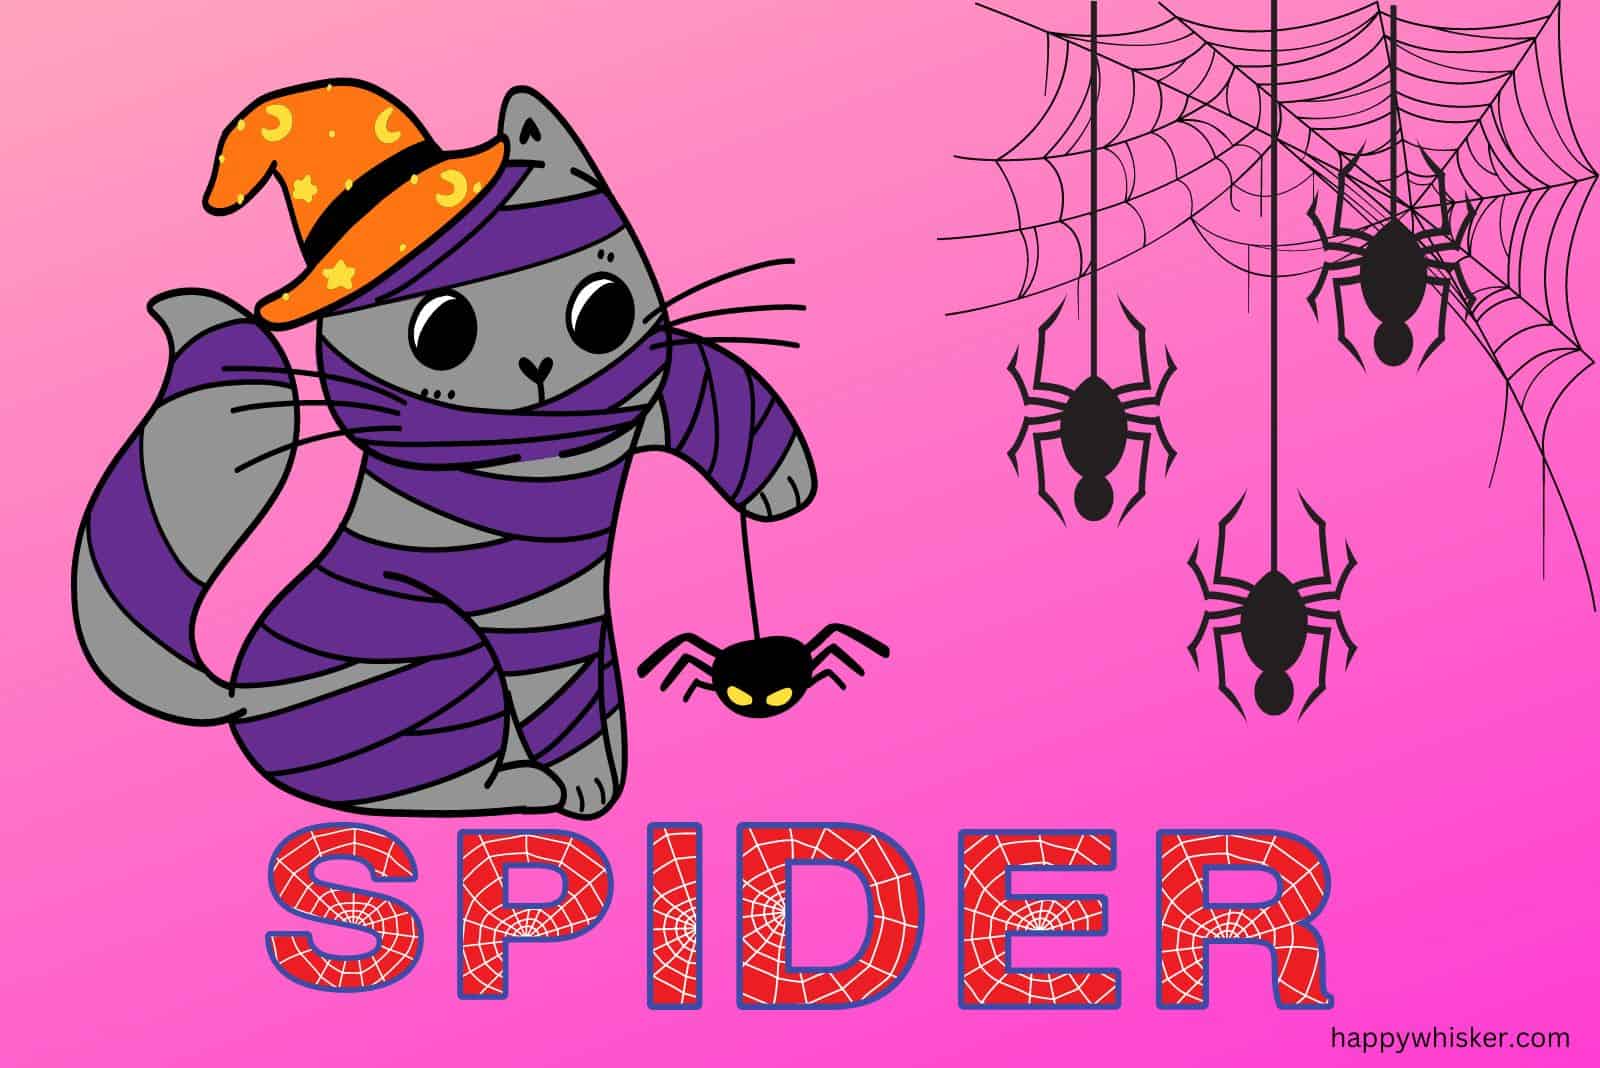 spider name and cat playing with spiders